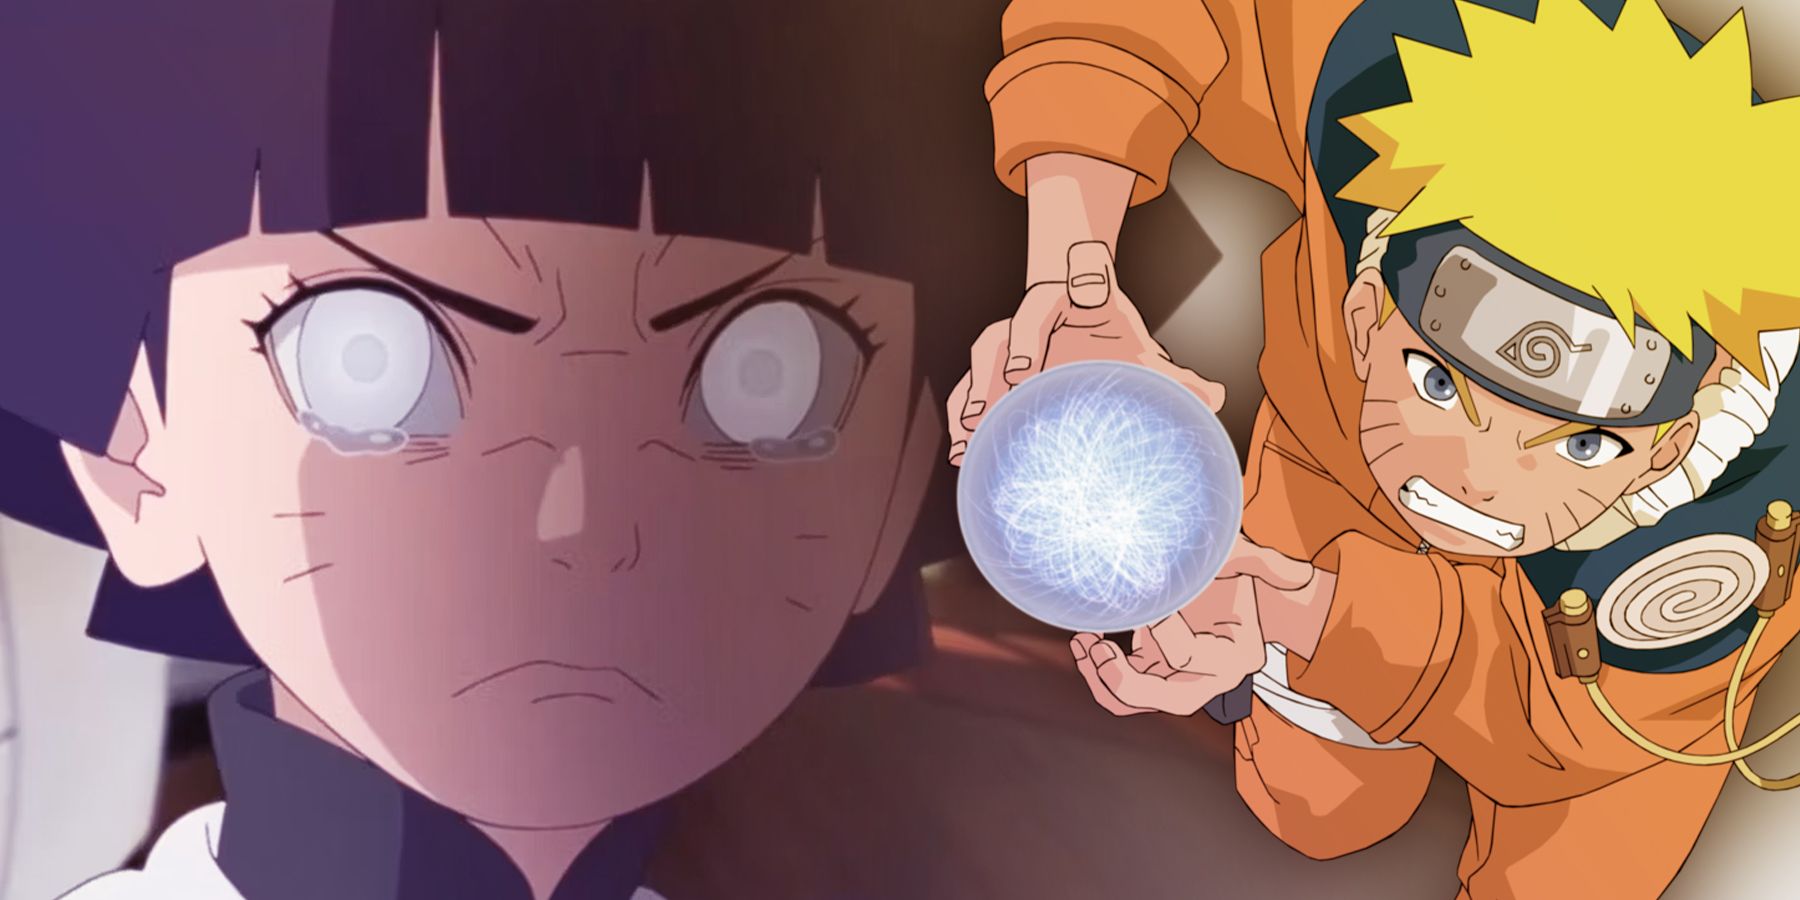 Naruto: Biggest Questions Answered In The Minato One Shot